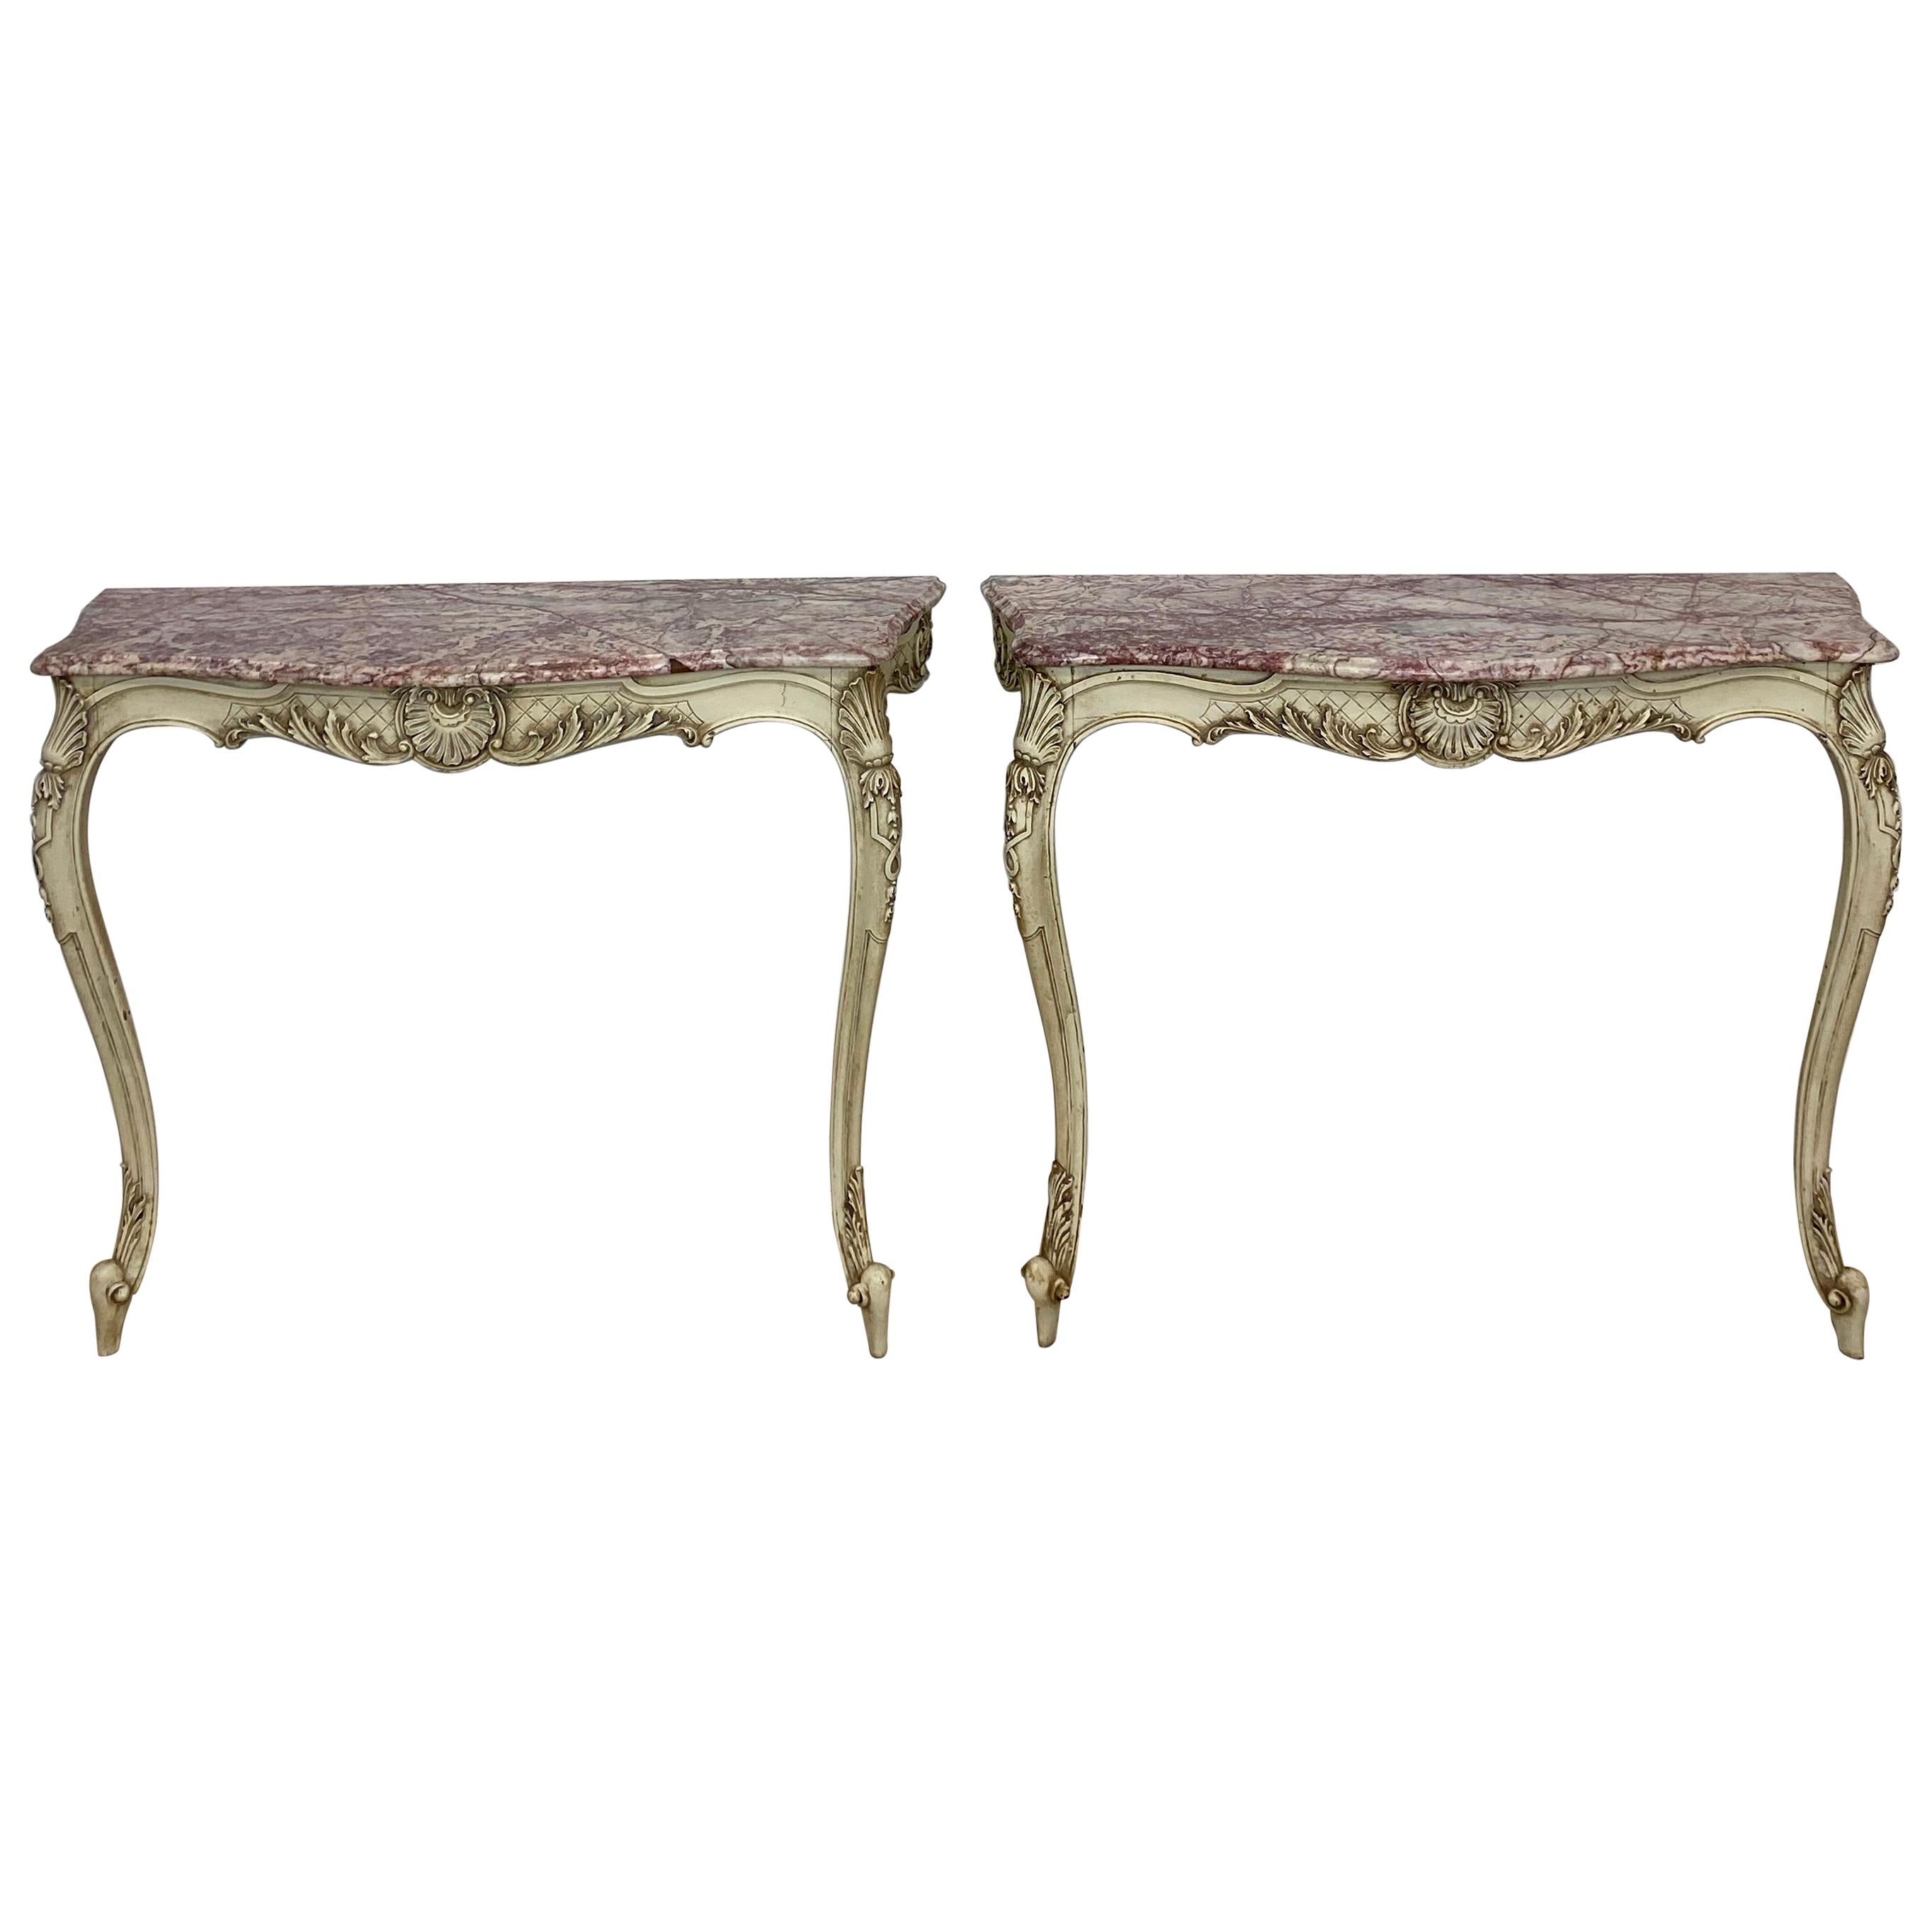 Pair of Marble-Top Console Tables